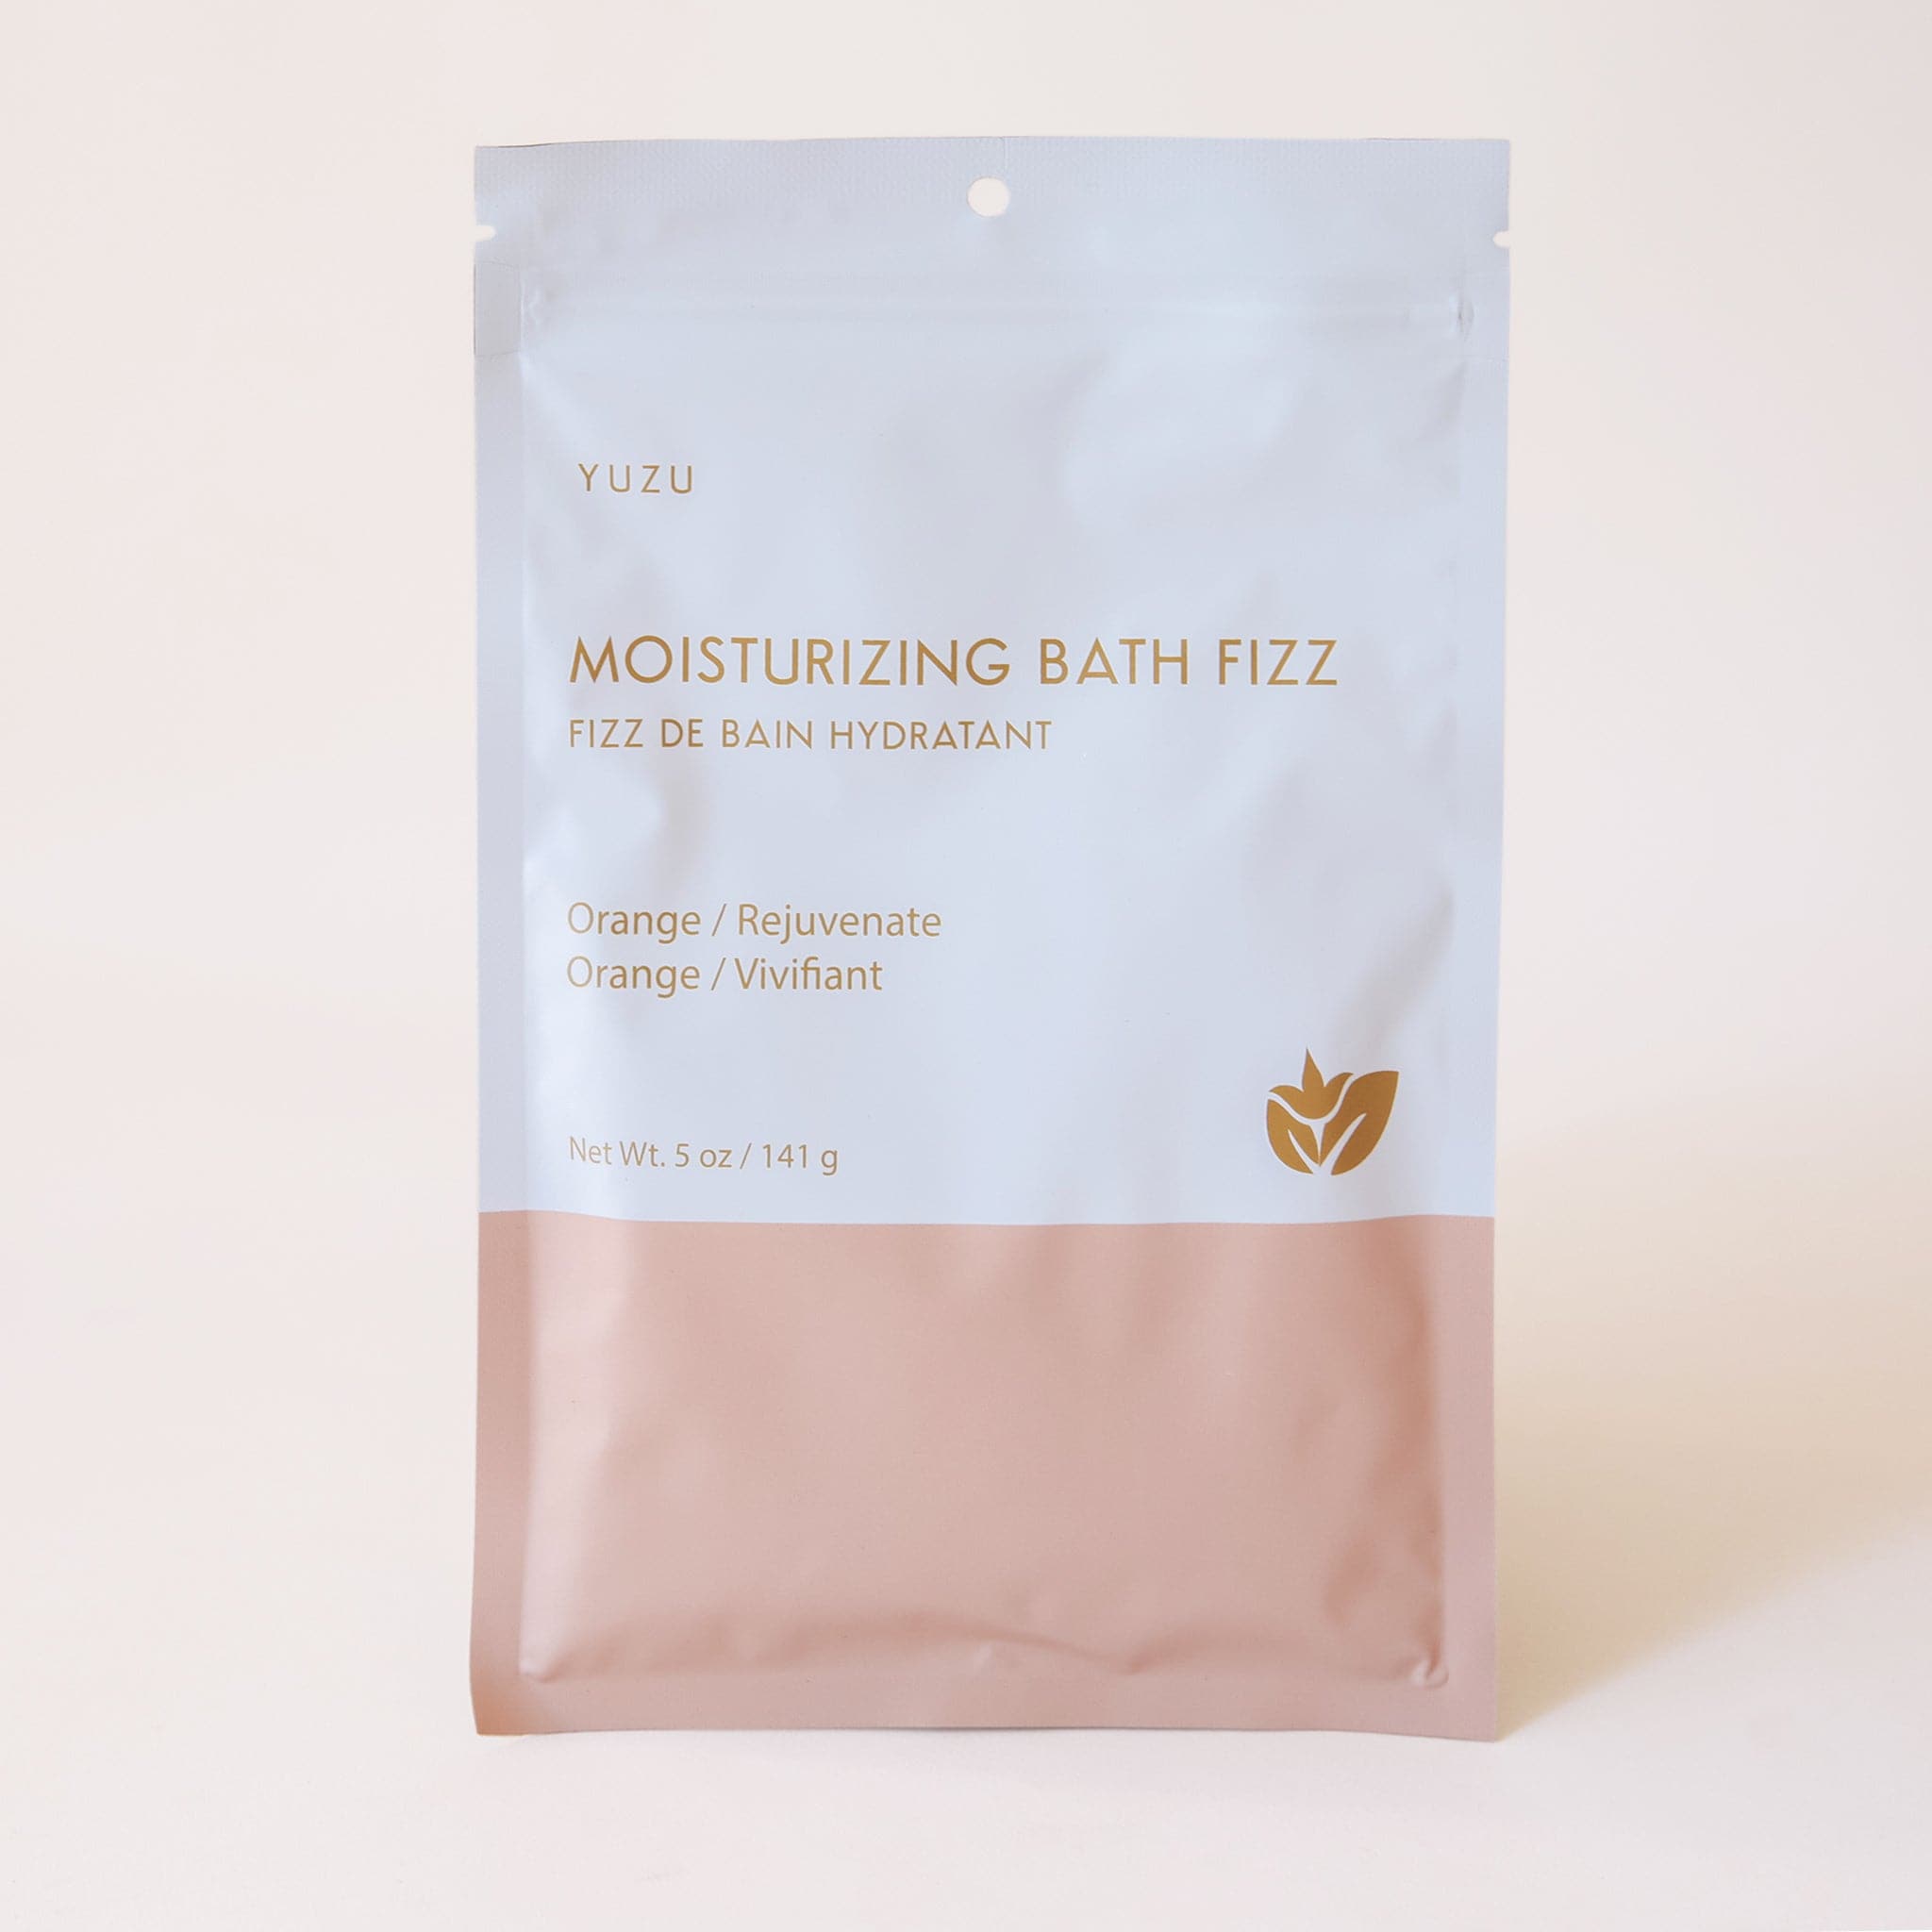 This bath fizz is packaged in a resealable white and pink envelope with gold writing that reads, &quot;Moisturizing Bath Fizz, Orange / Rejuvinate&quot;